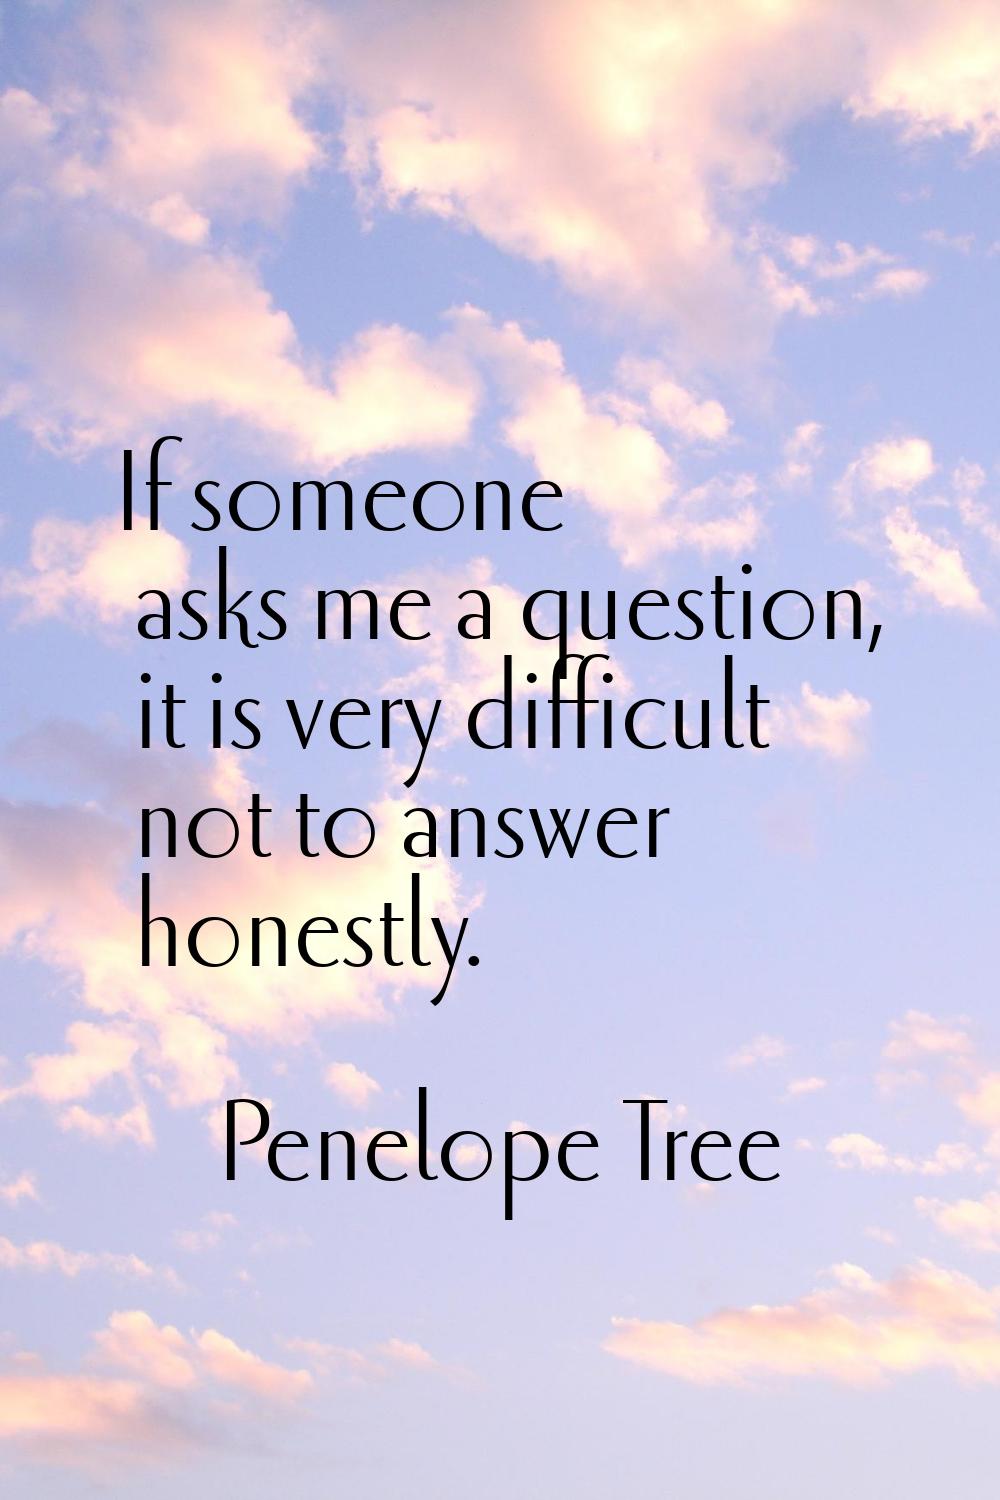 If someone asks me a question, it is very difficult not to answer honestly.